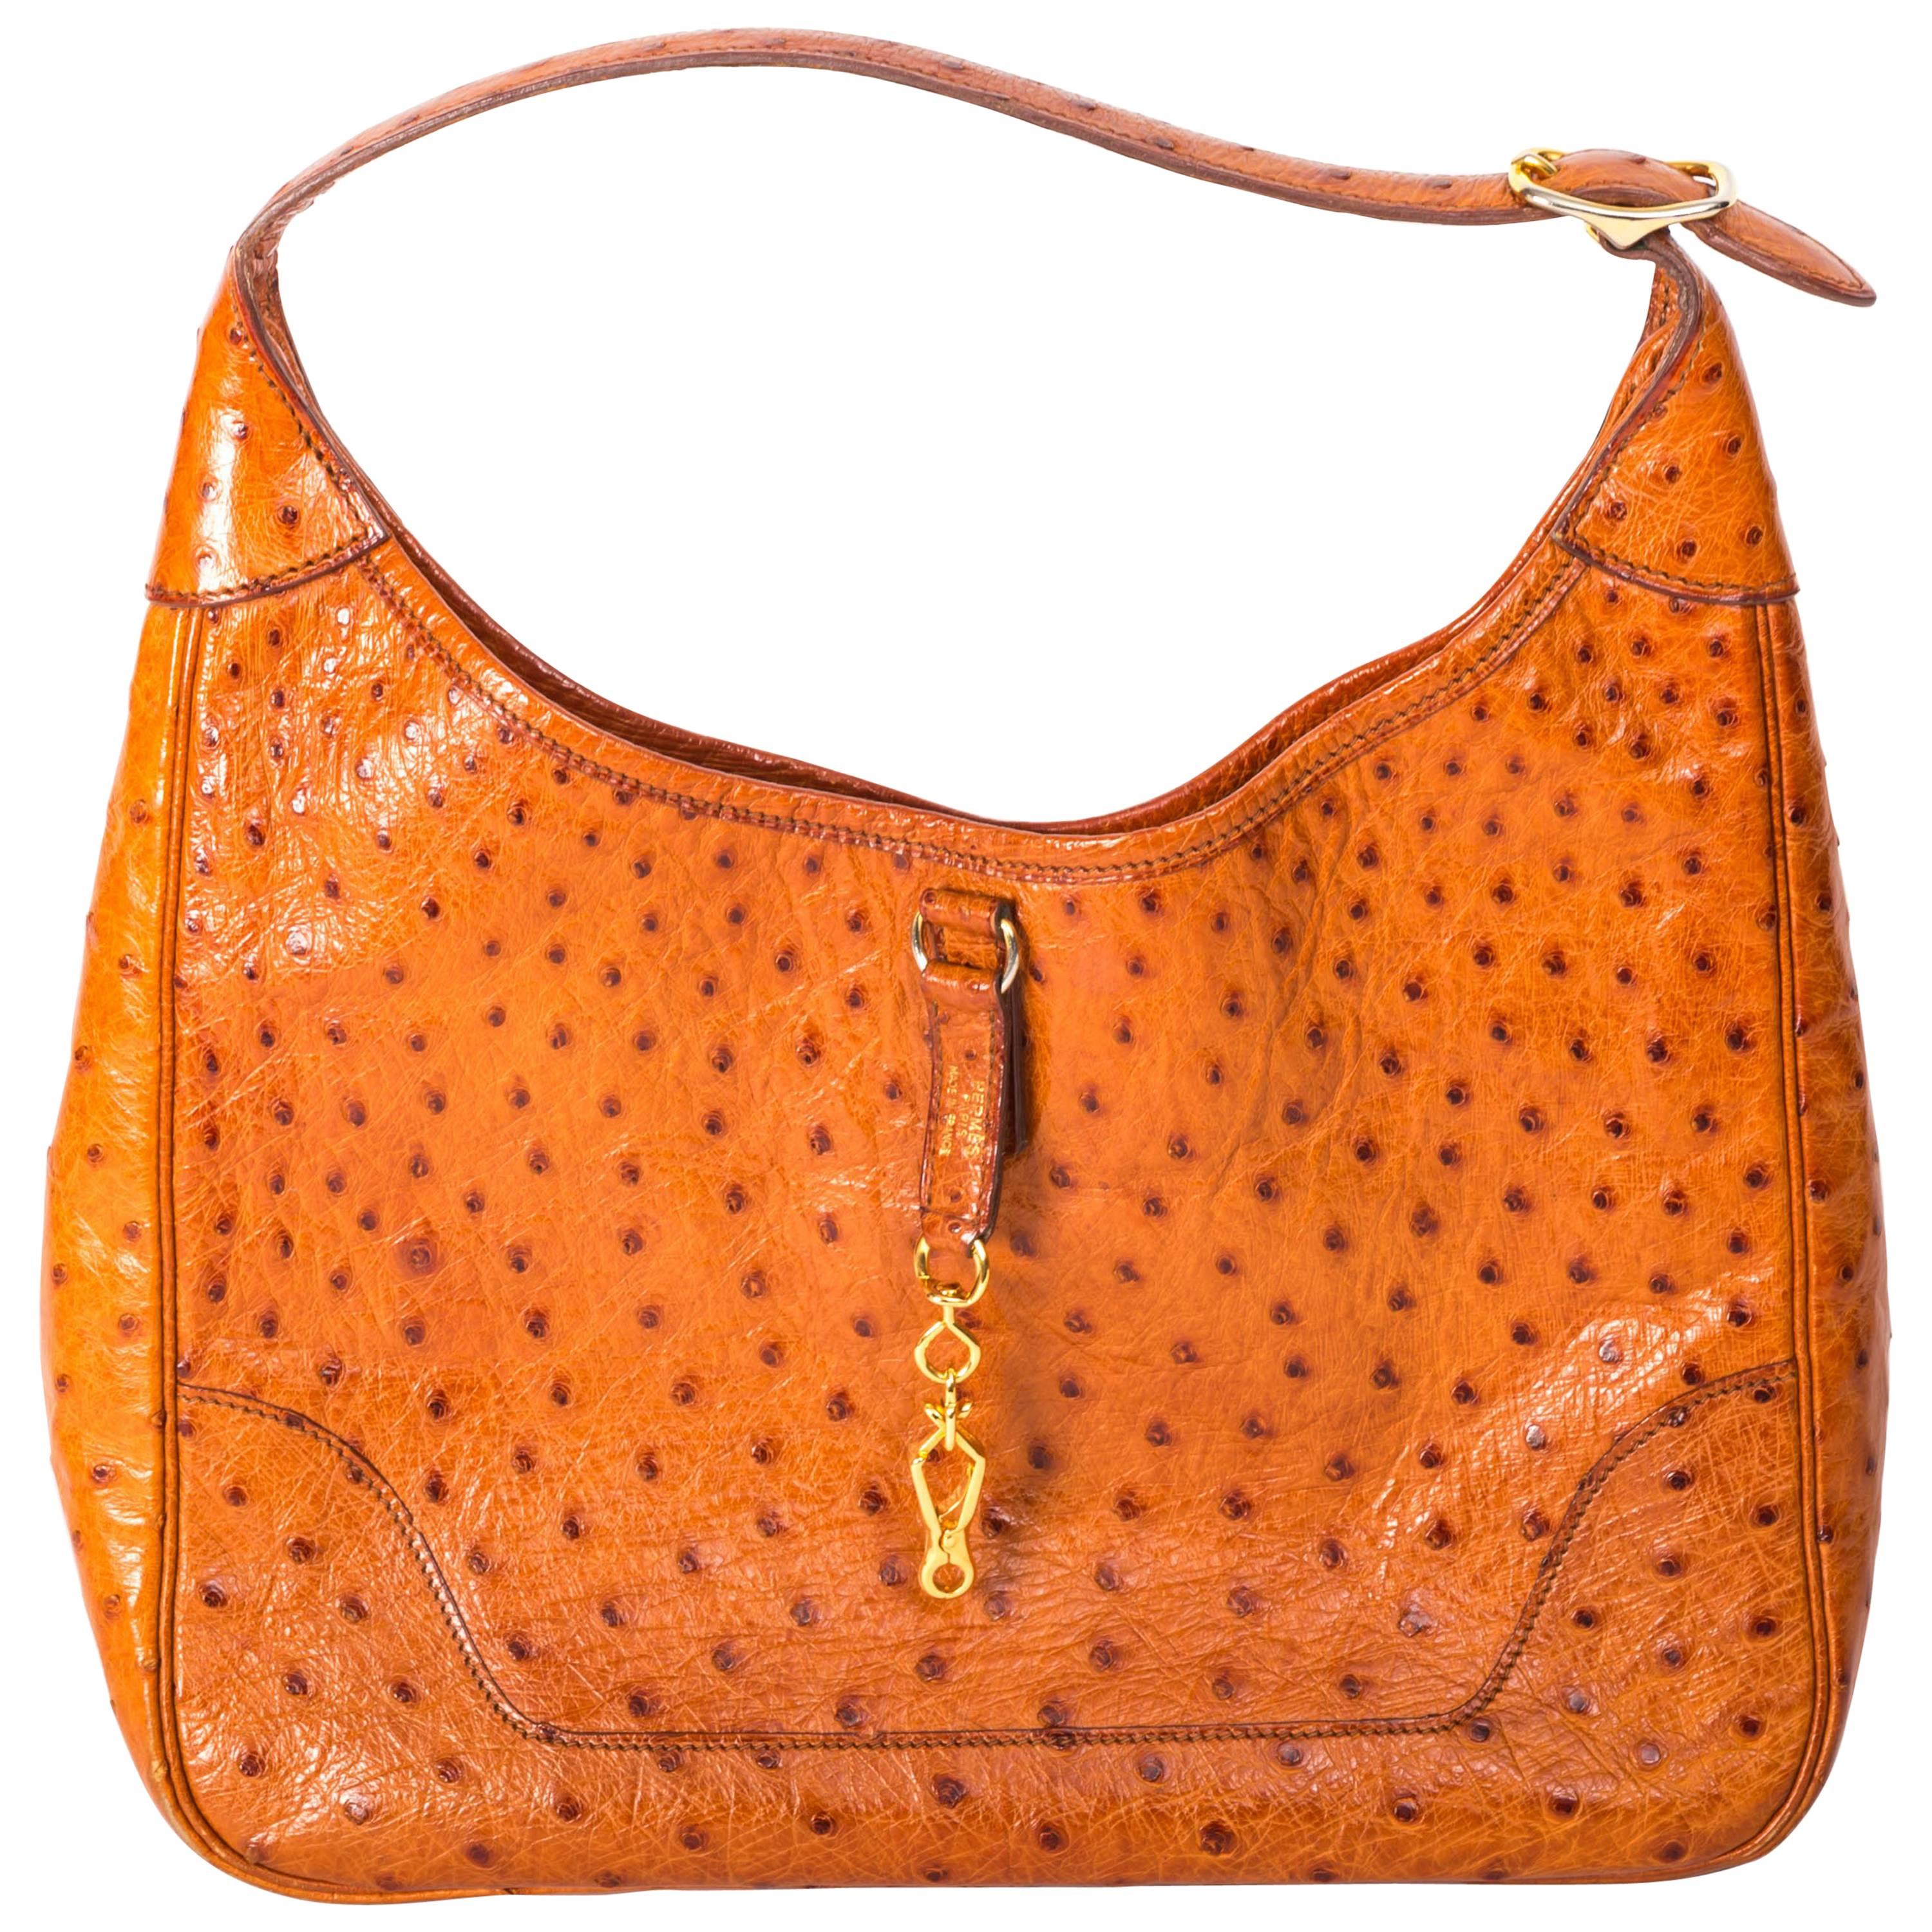 Hermes Tan Ostrich Trim Bag with Gold Hardware